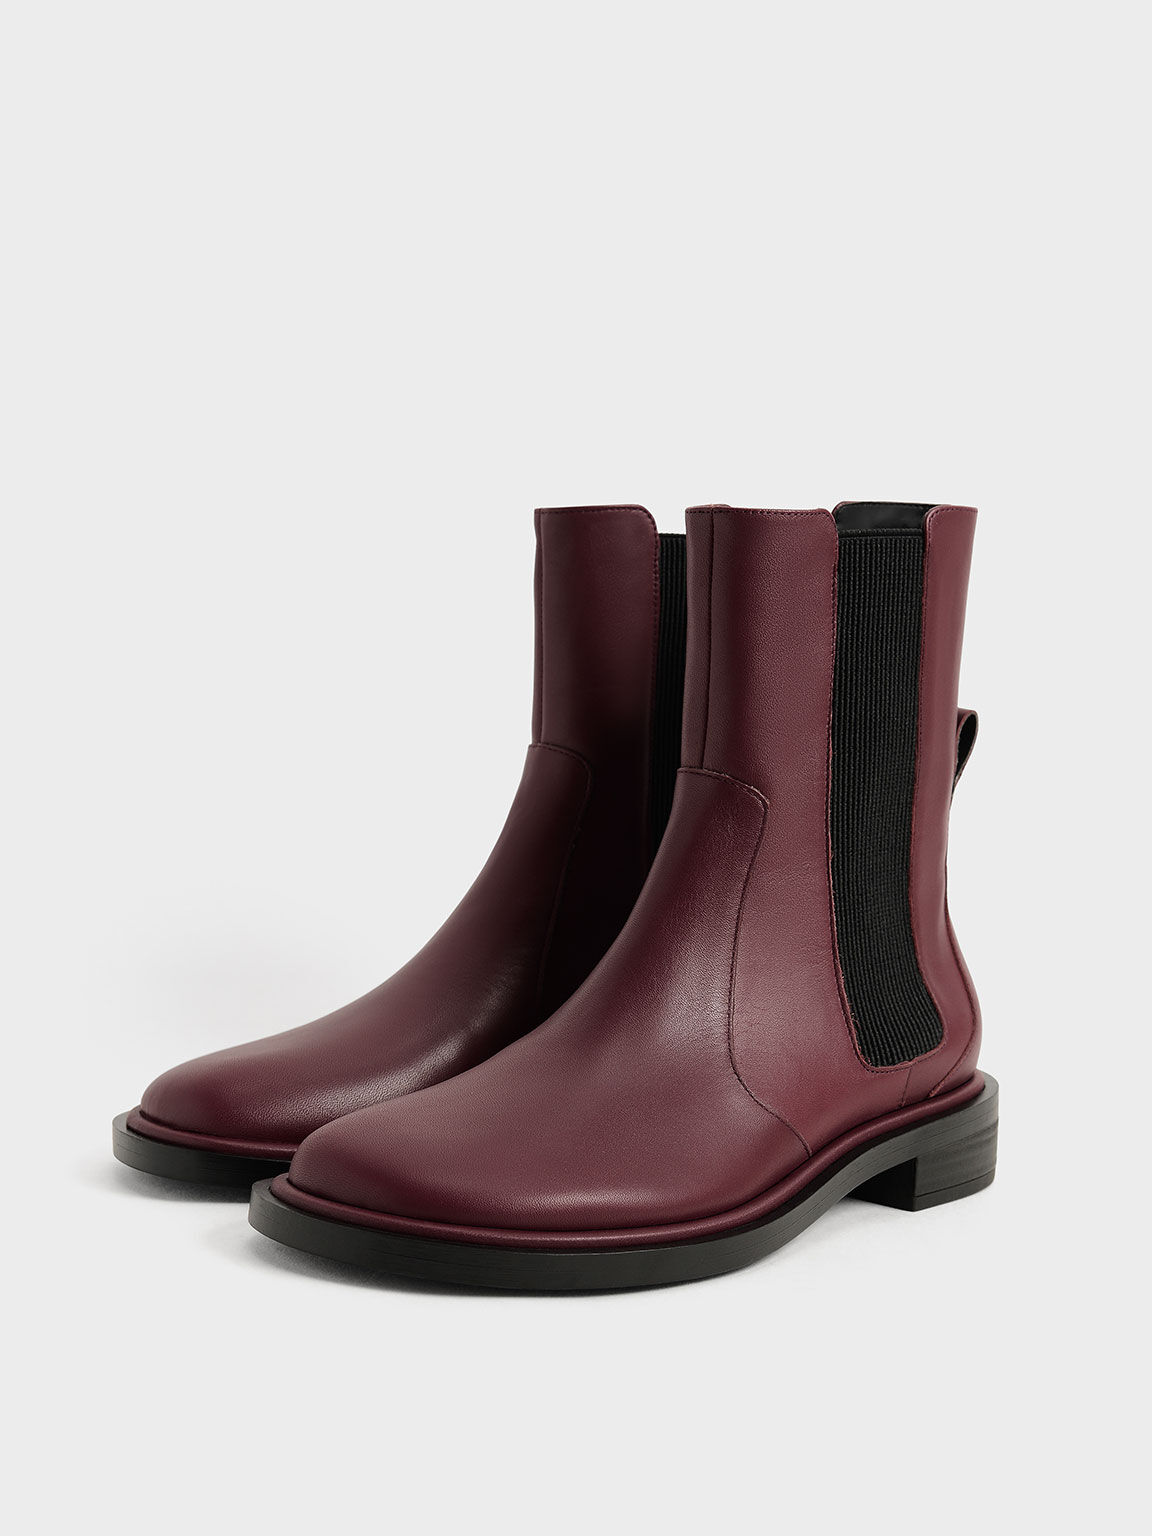 Burgundy Leather Round-Toe Chelsea Boots - CHARLES & KEITH VN